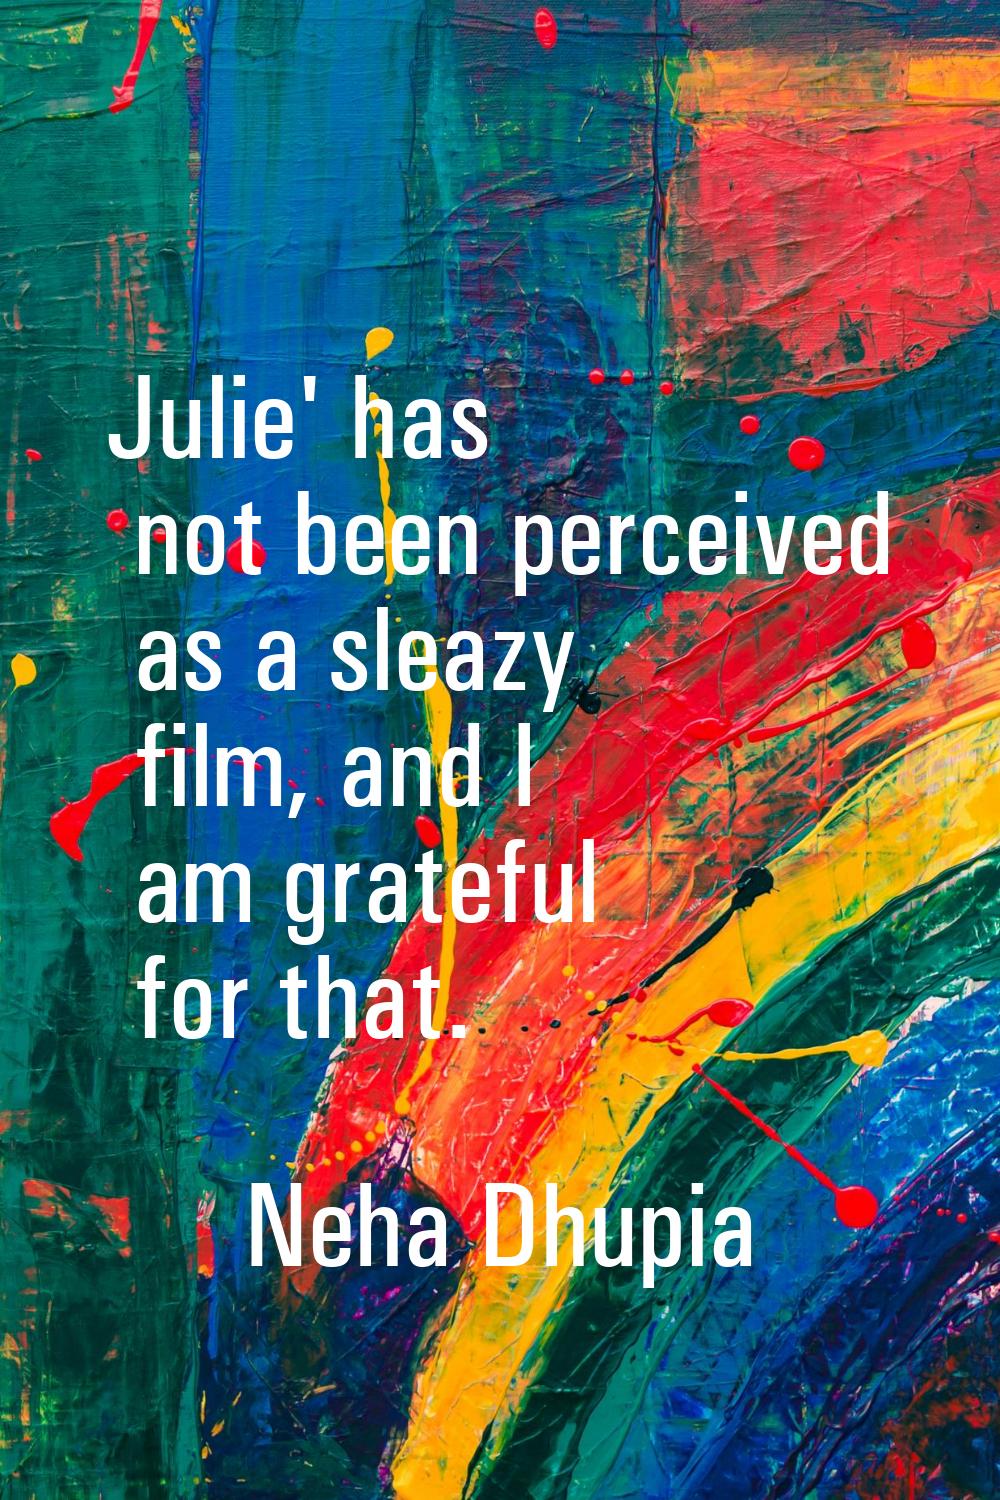 Julie' has not been perceived as a sleazy film, and I am grateful for that.